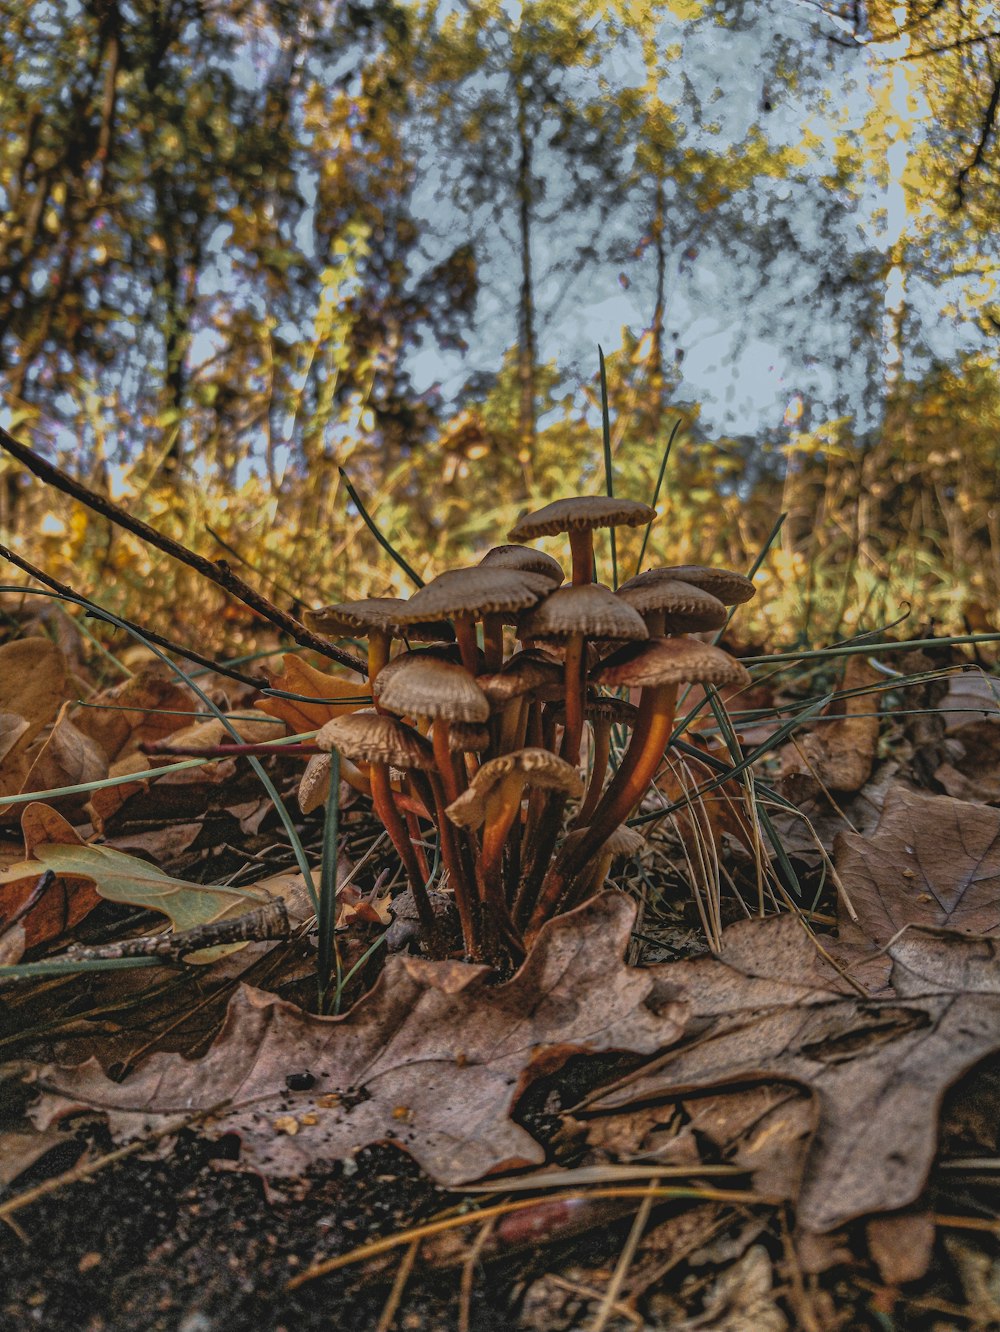 a group of mushrooms growing on a log in the woods